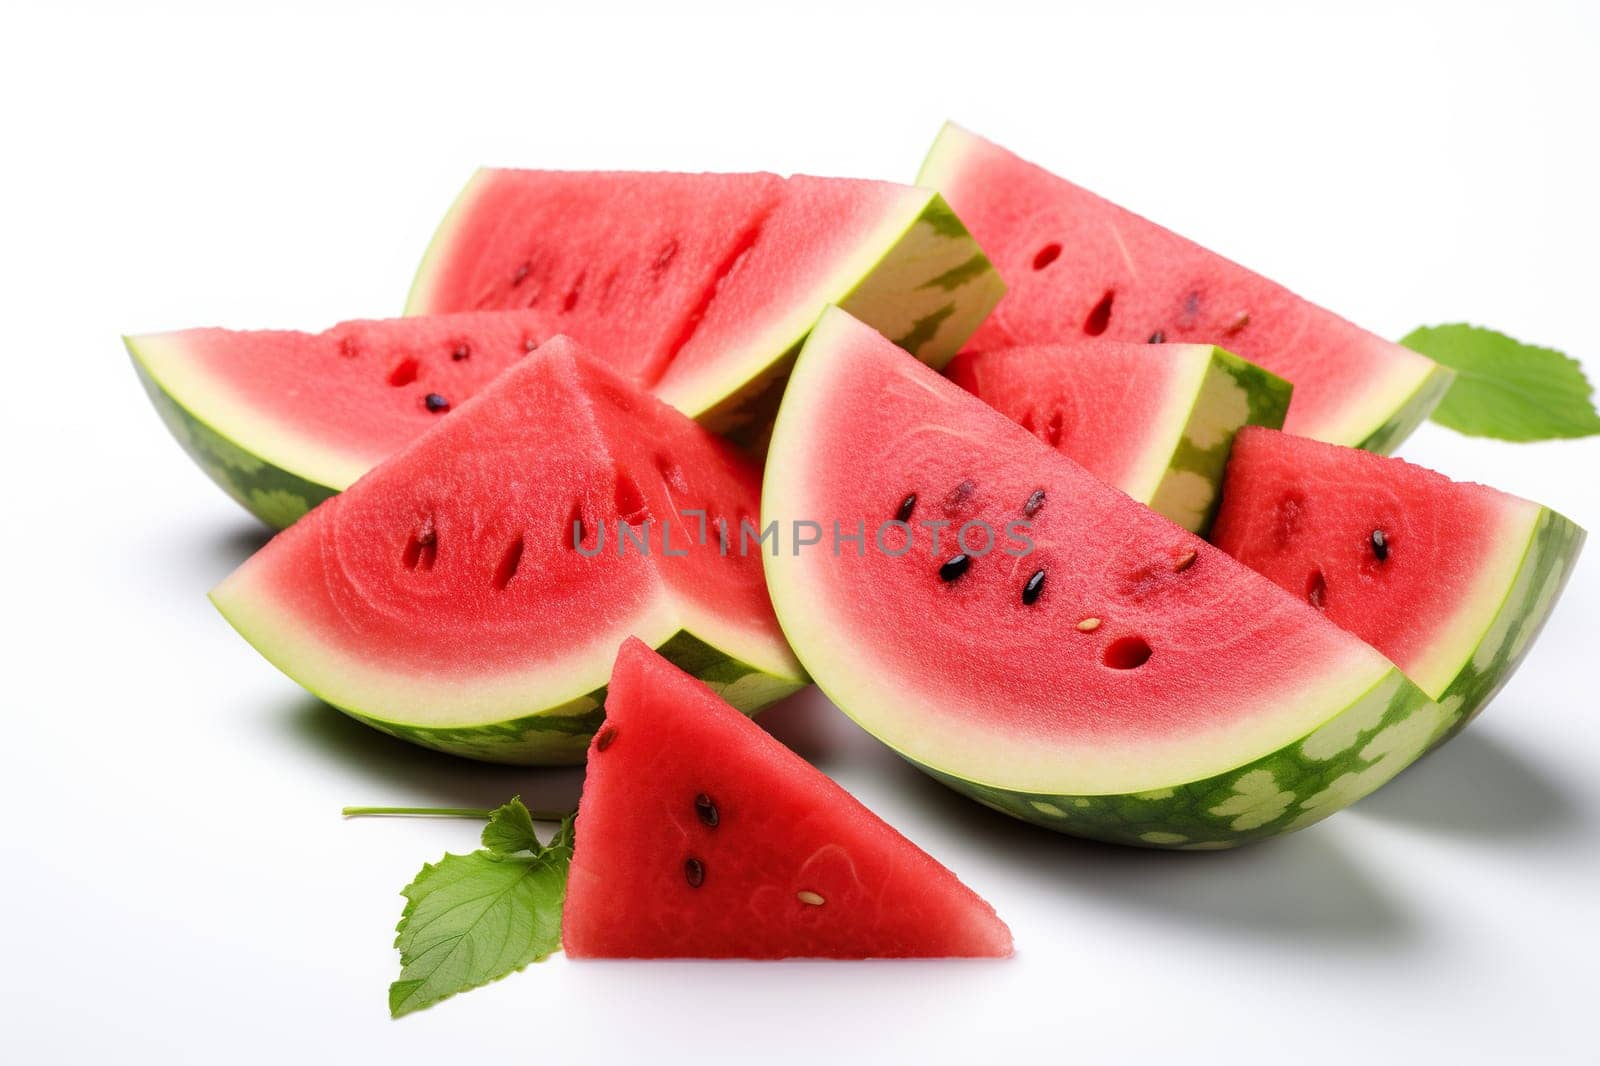 Pieces of juicy ripe watermelon on a white background.